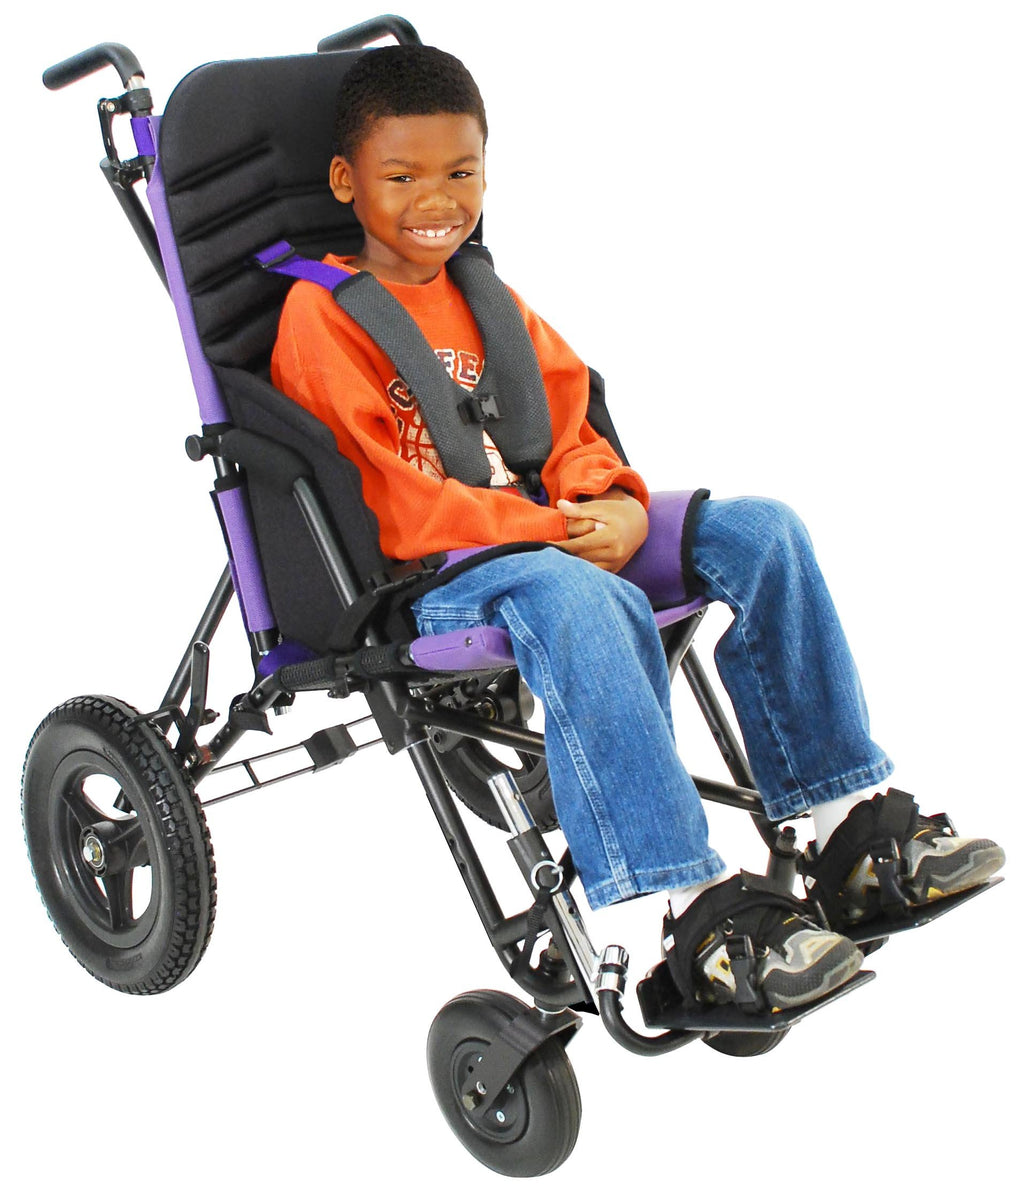 Wide Selection of Power Wheelchair Seat Cushions - No Tax & Free Shipping